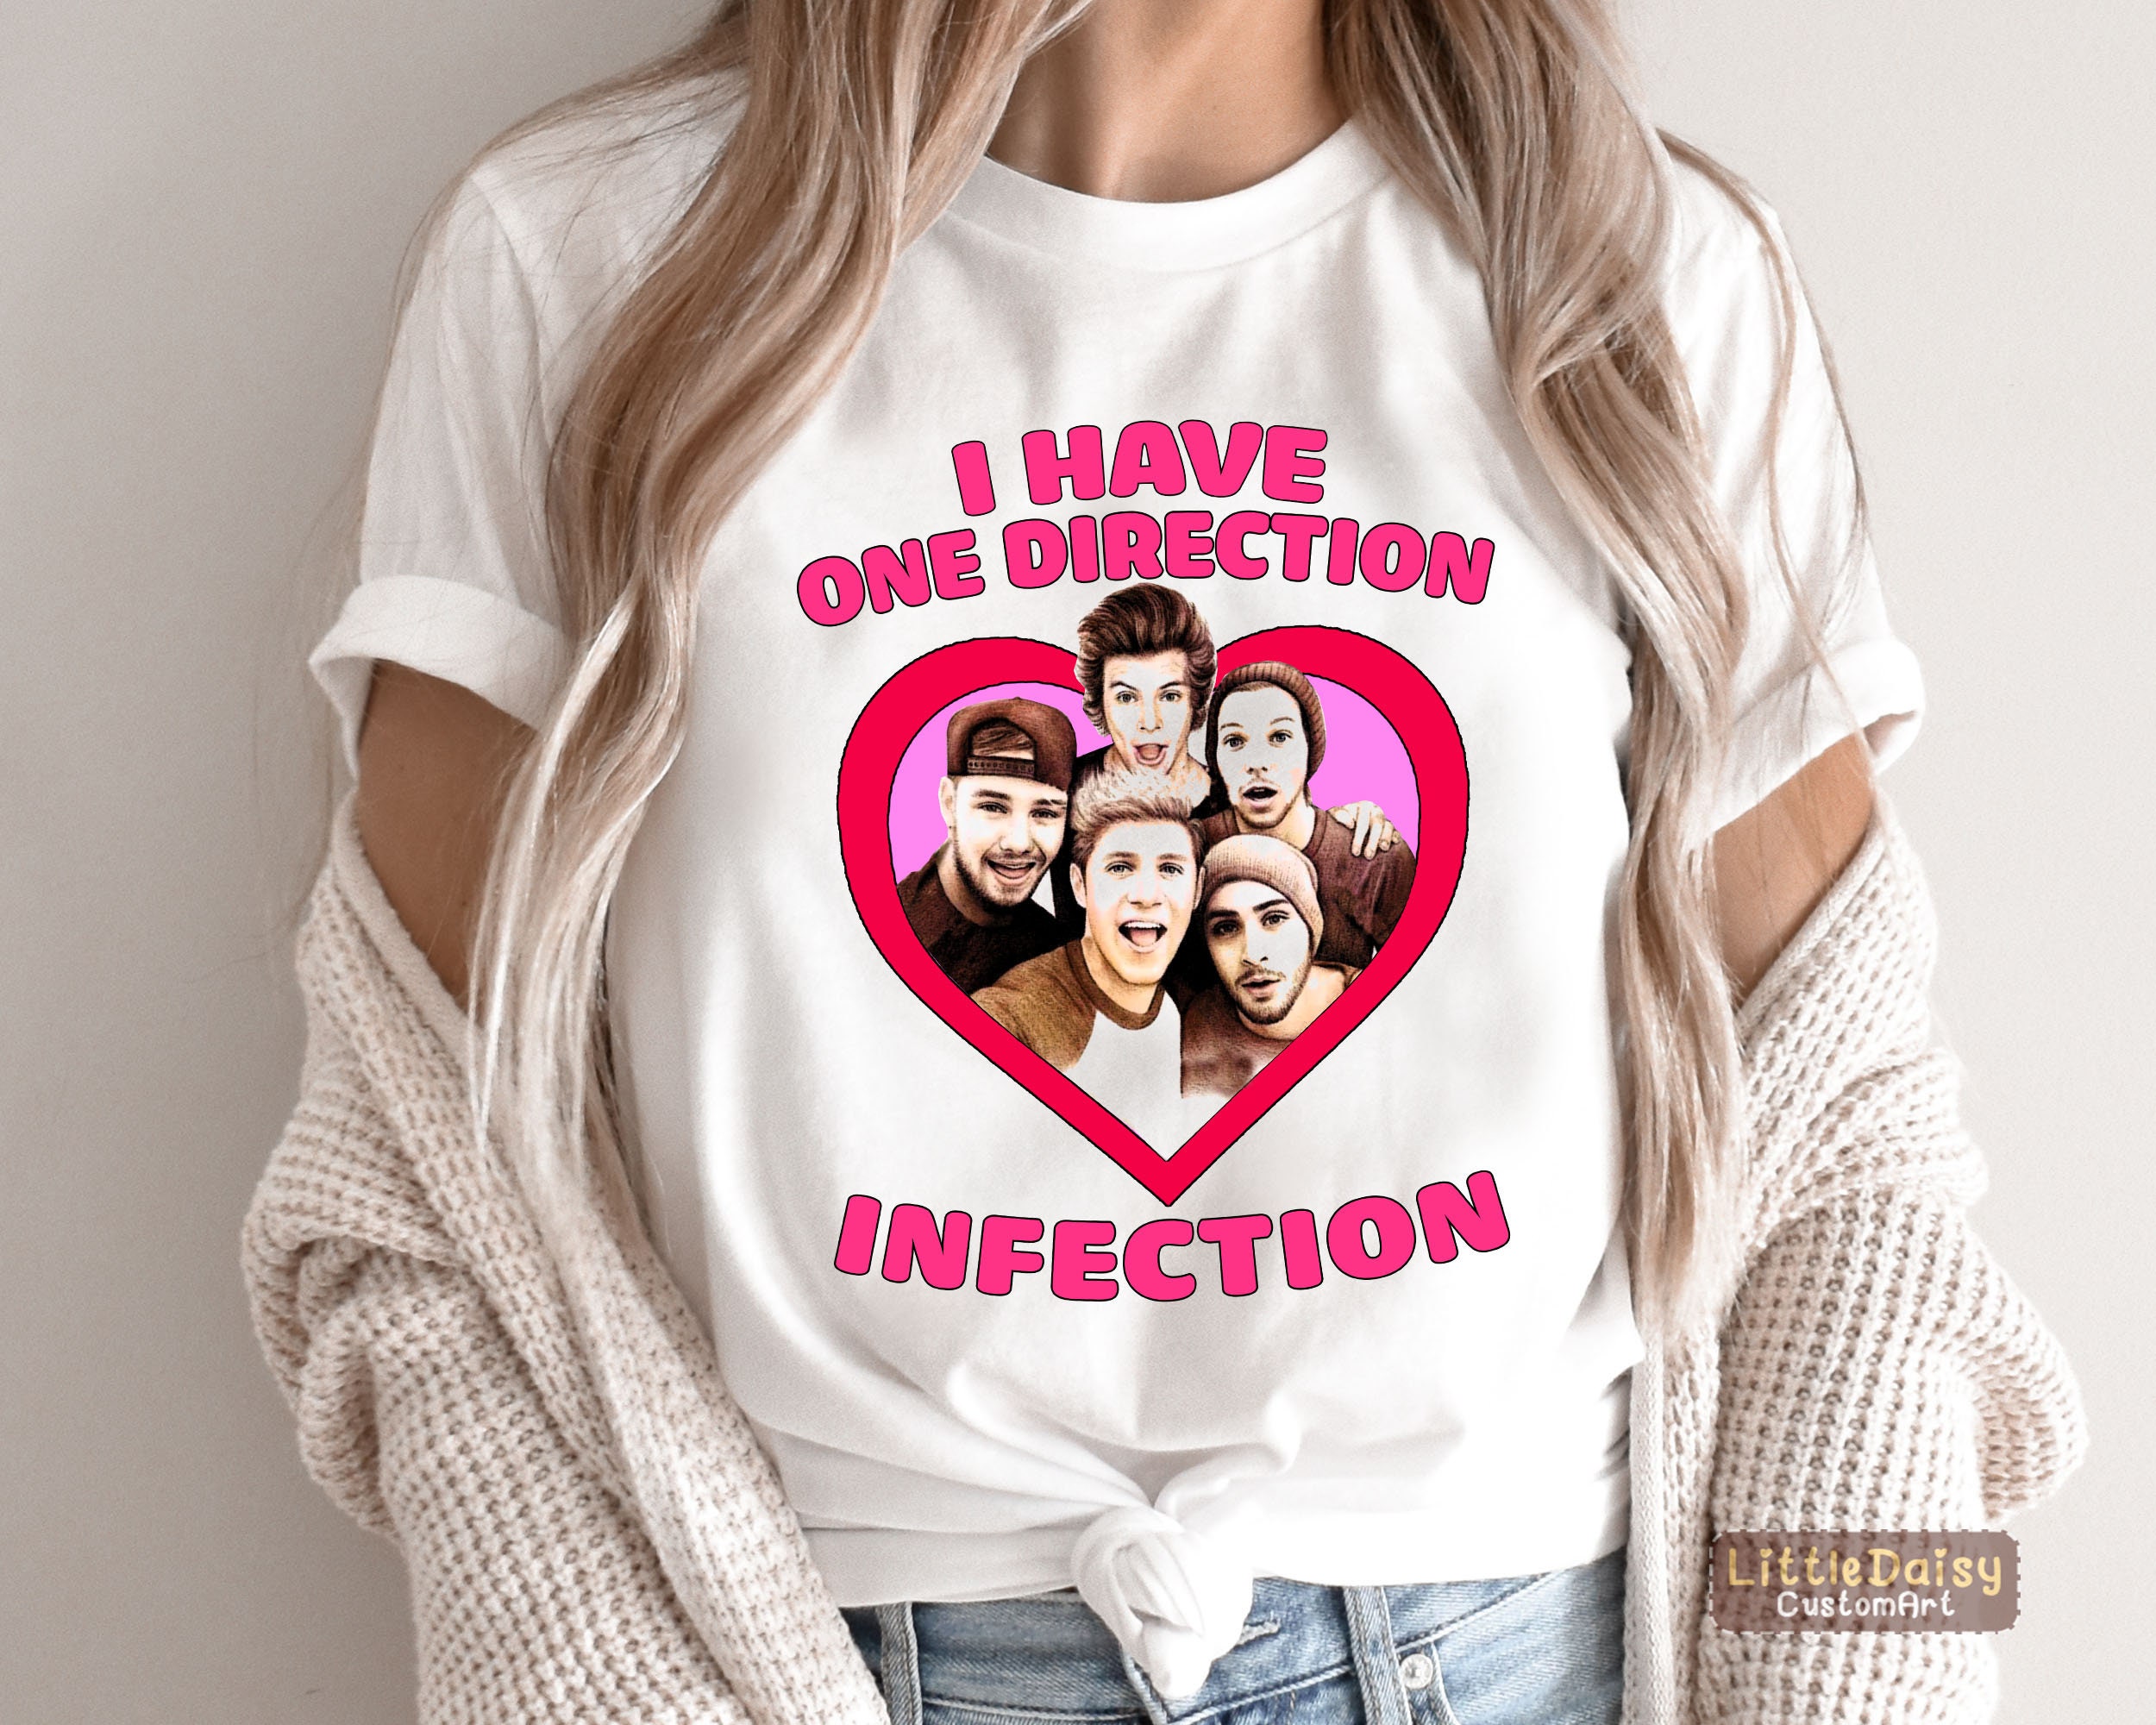 I Have One Direction Infection Shirt, One Direction T-Shirt